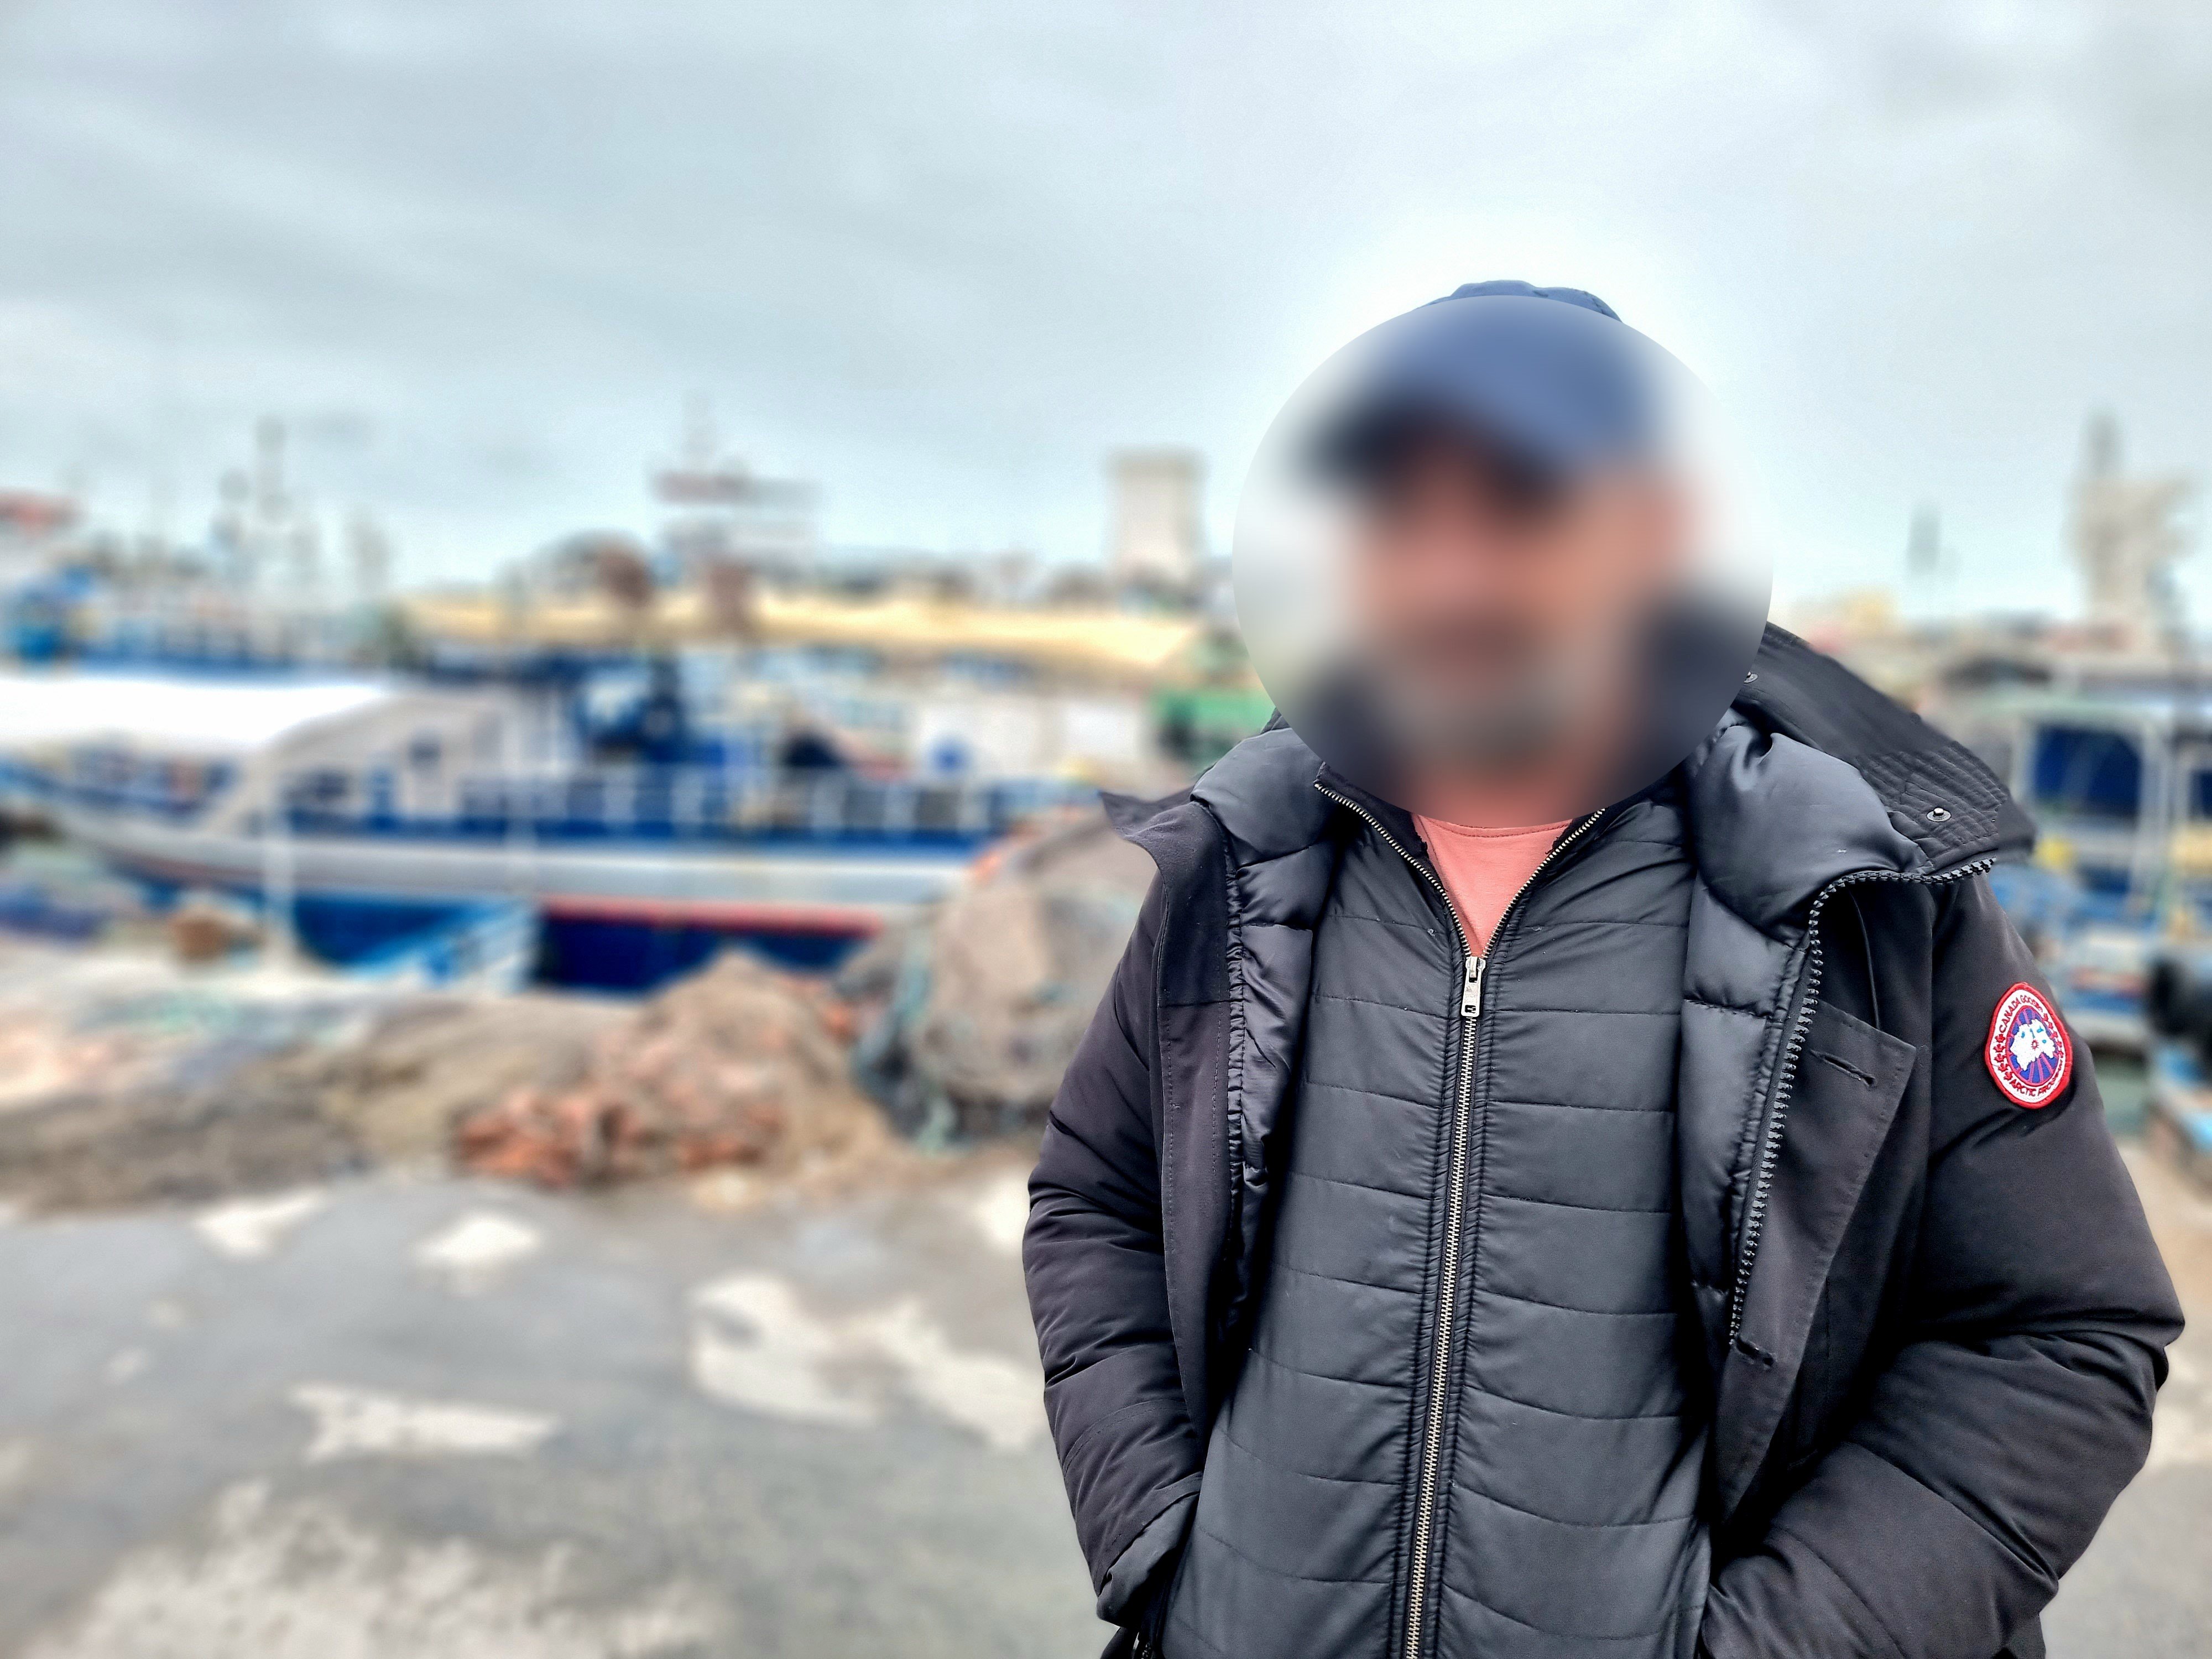 A Tunisian fisherman in a port with a blurred face